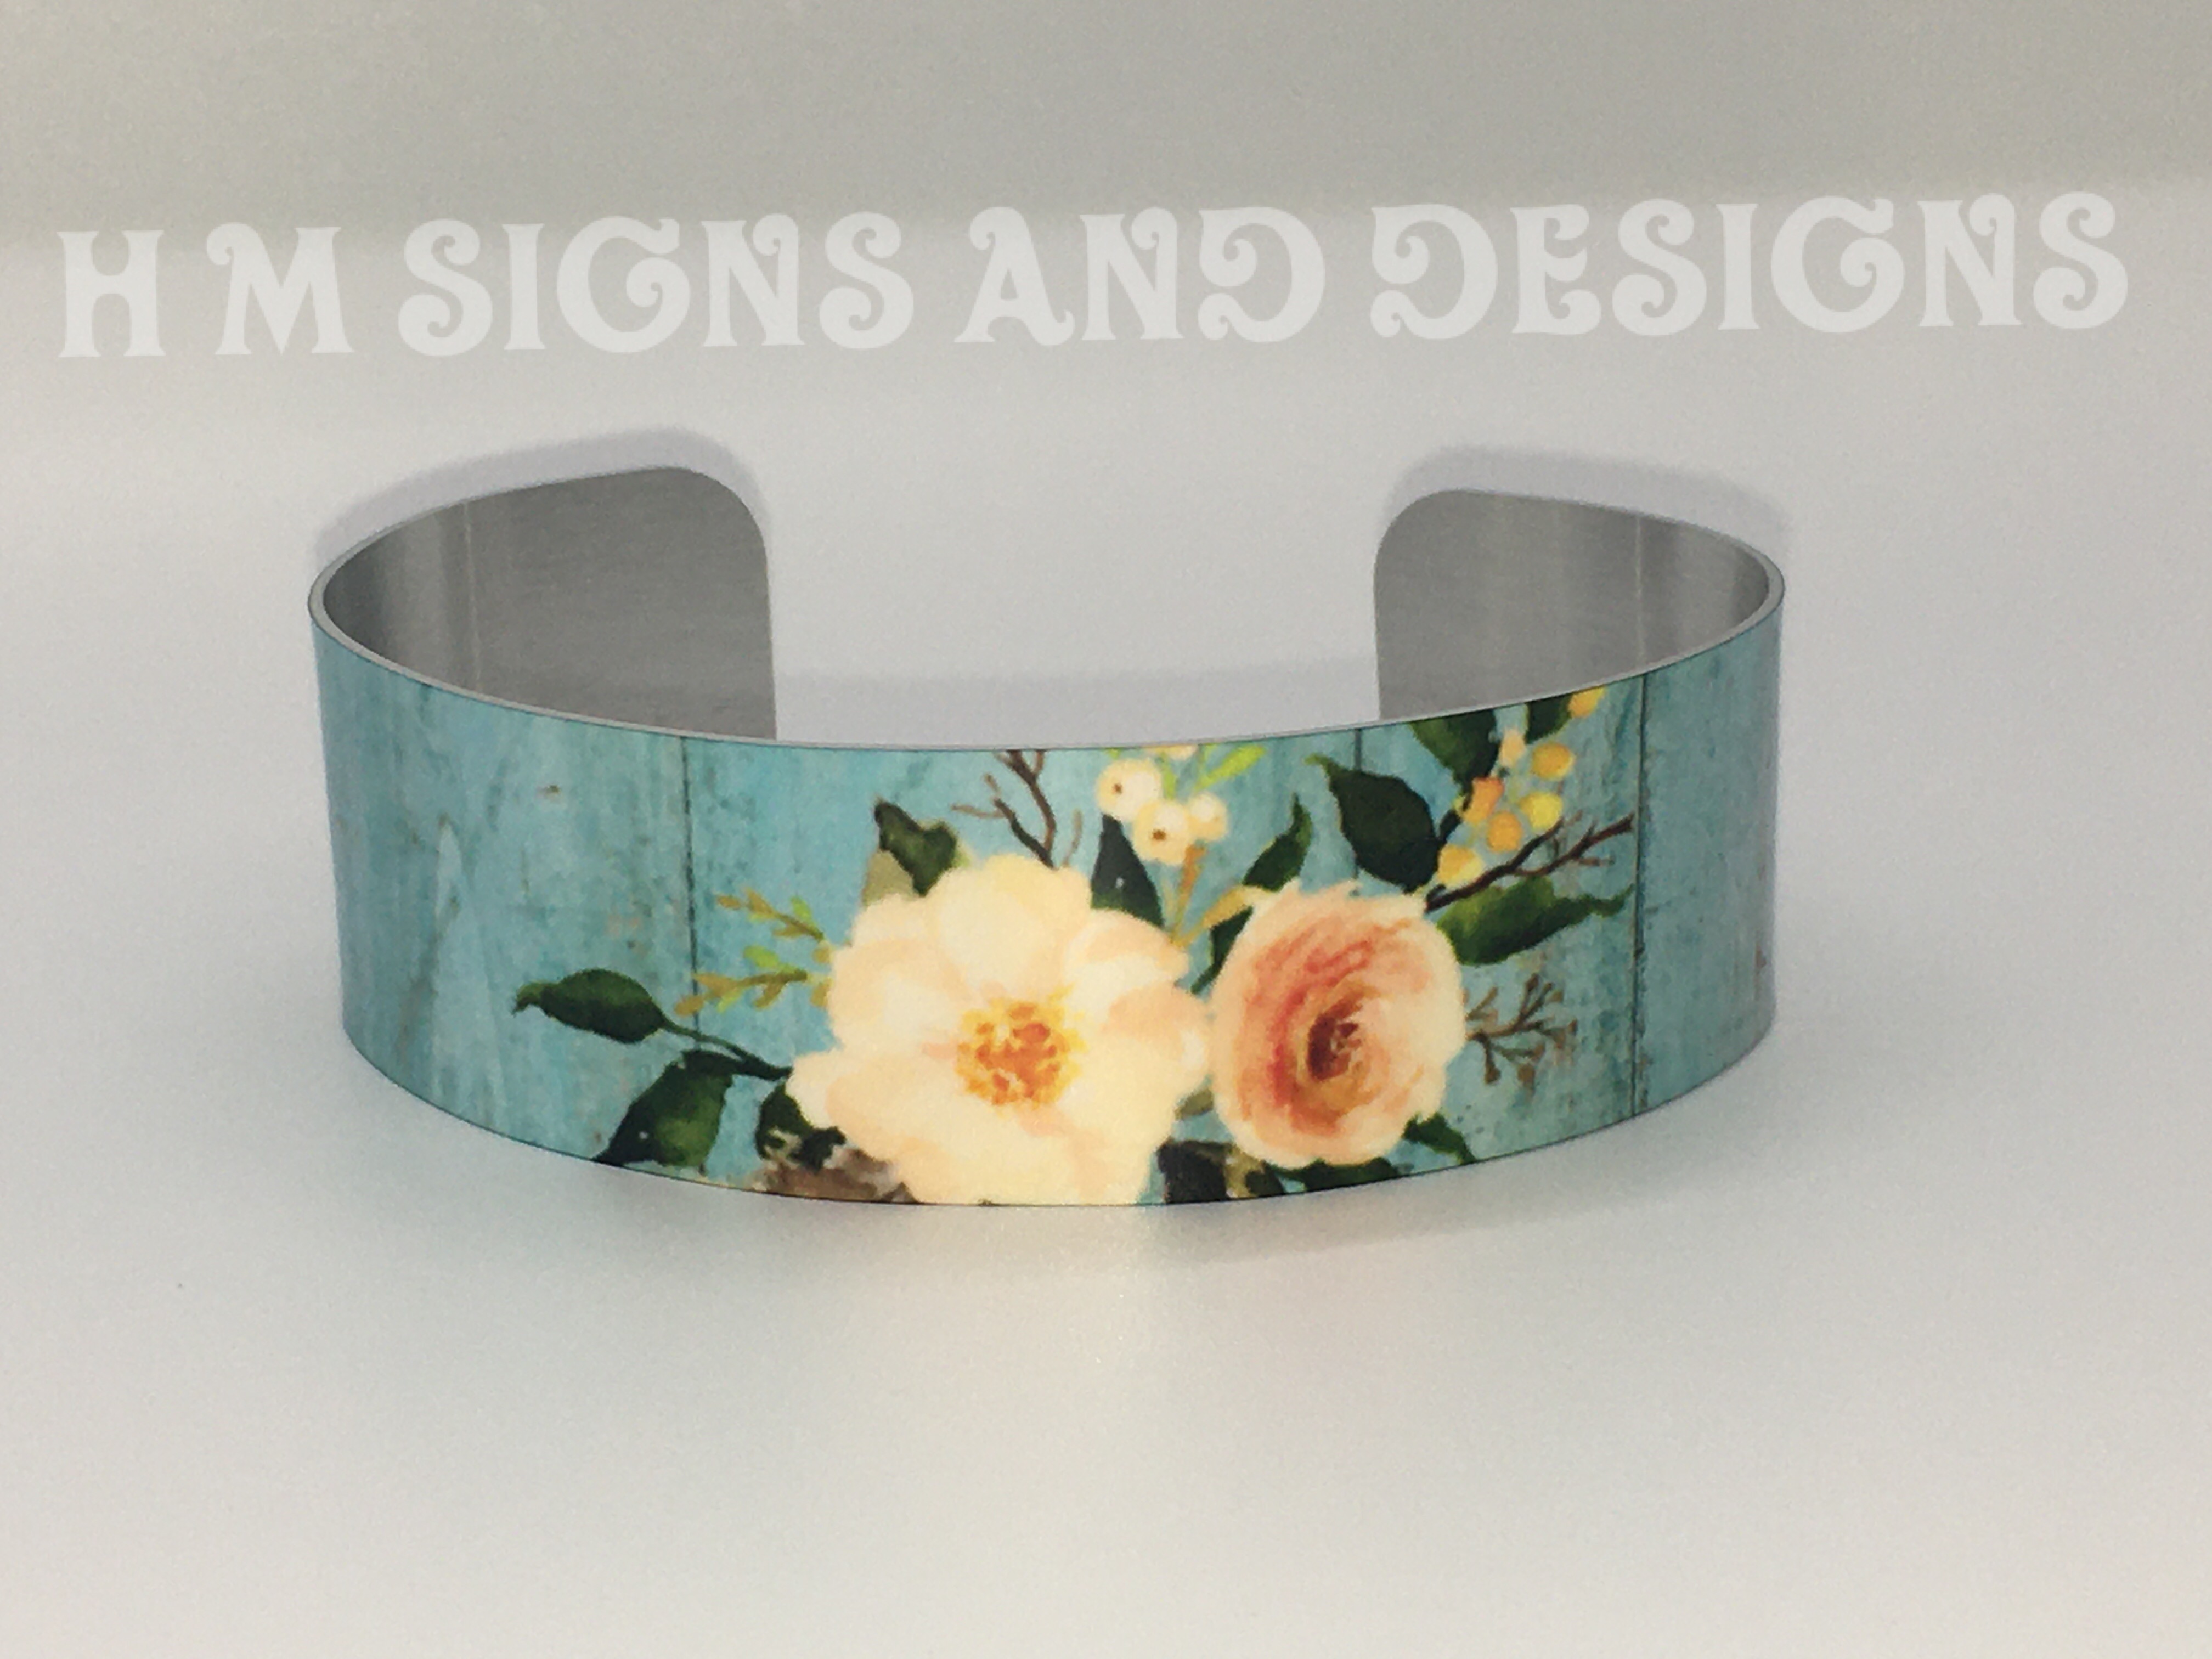 Rustic Turquoise Cuff Bracelet made with sublimation printing